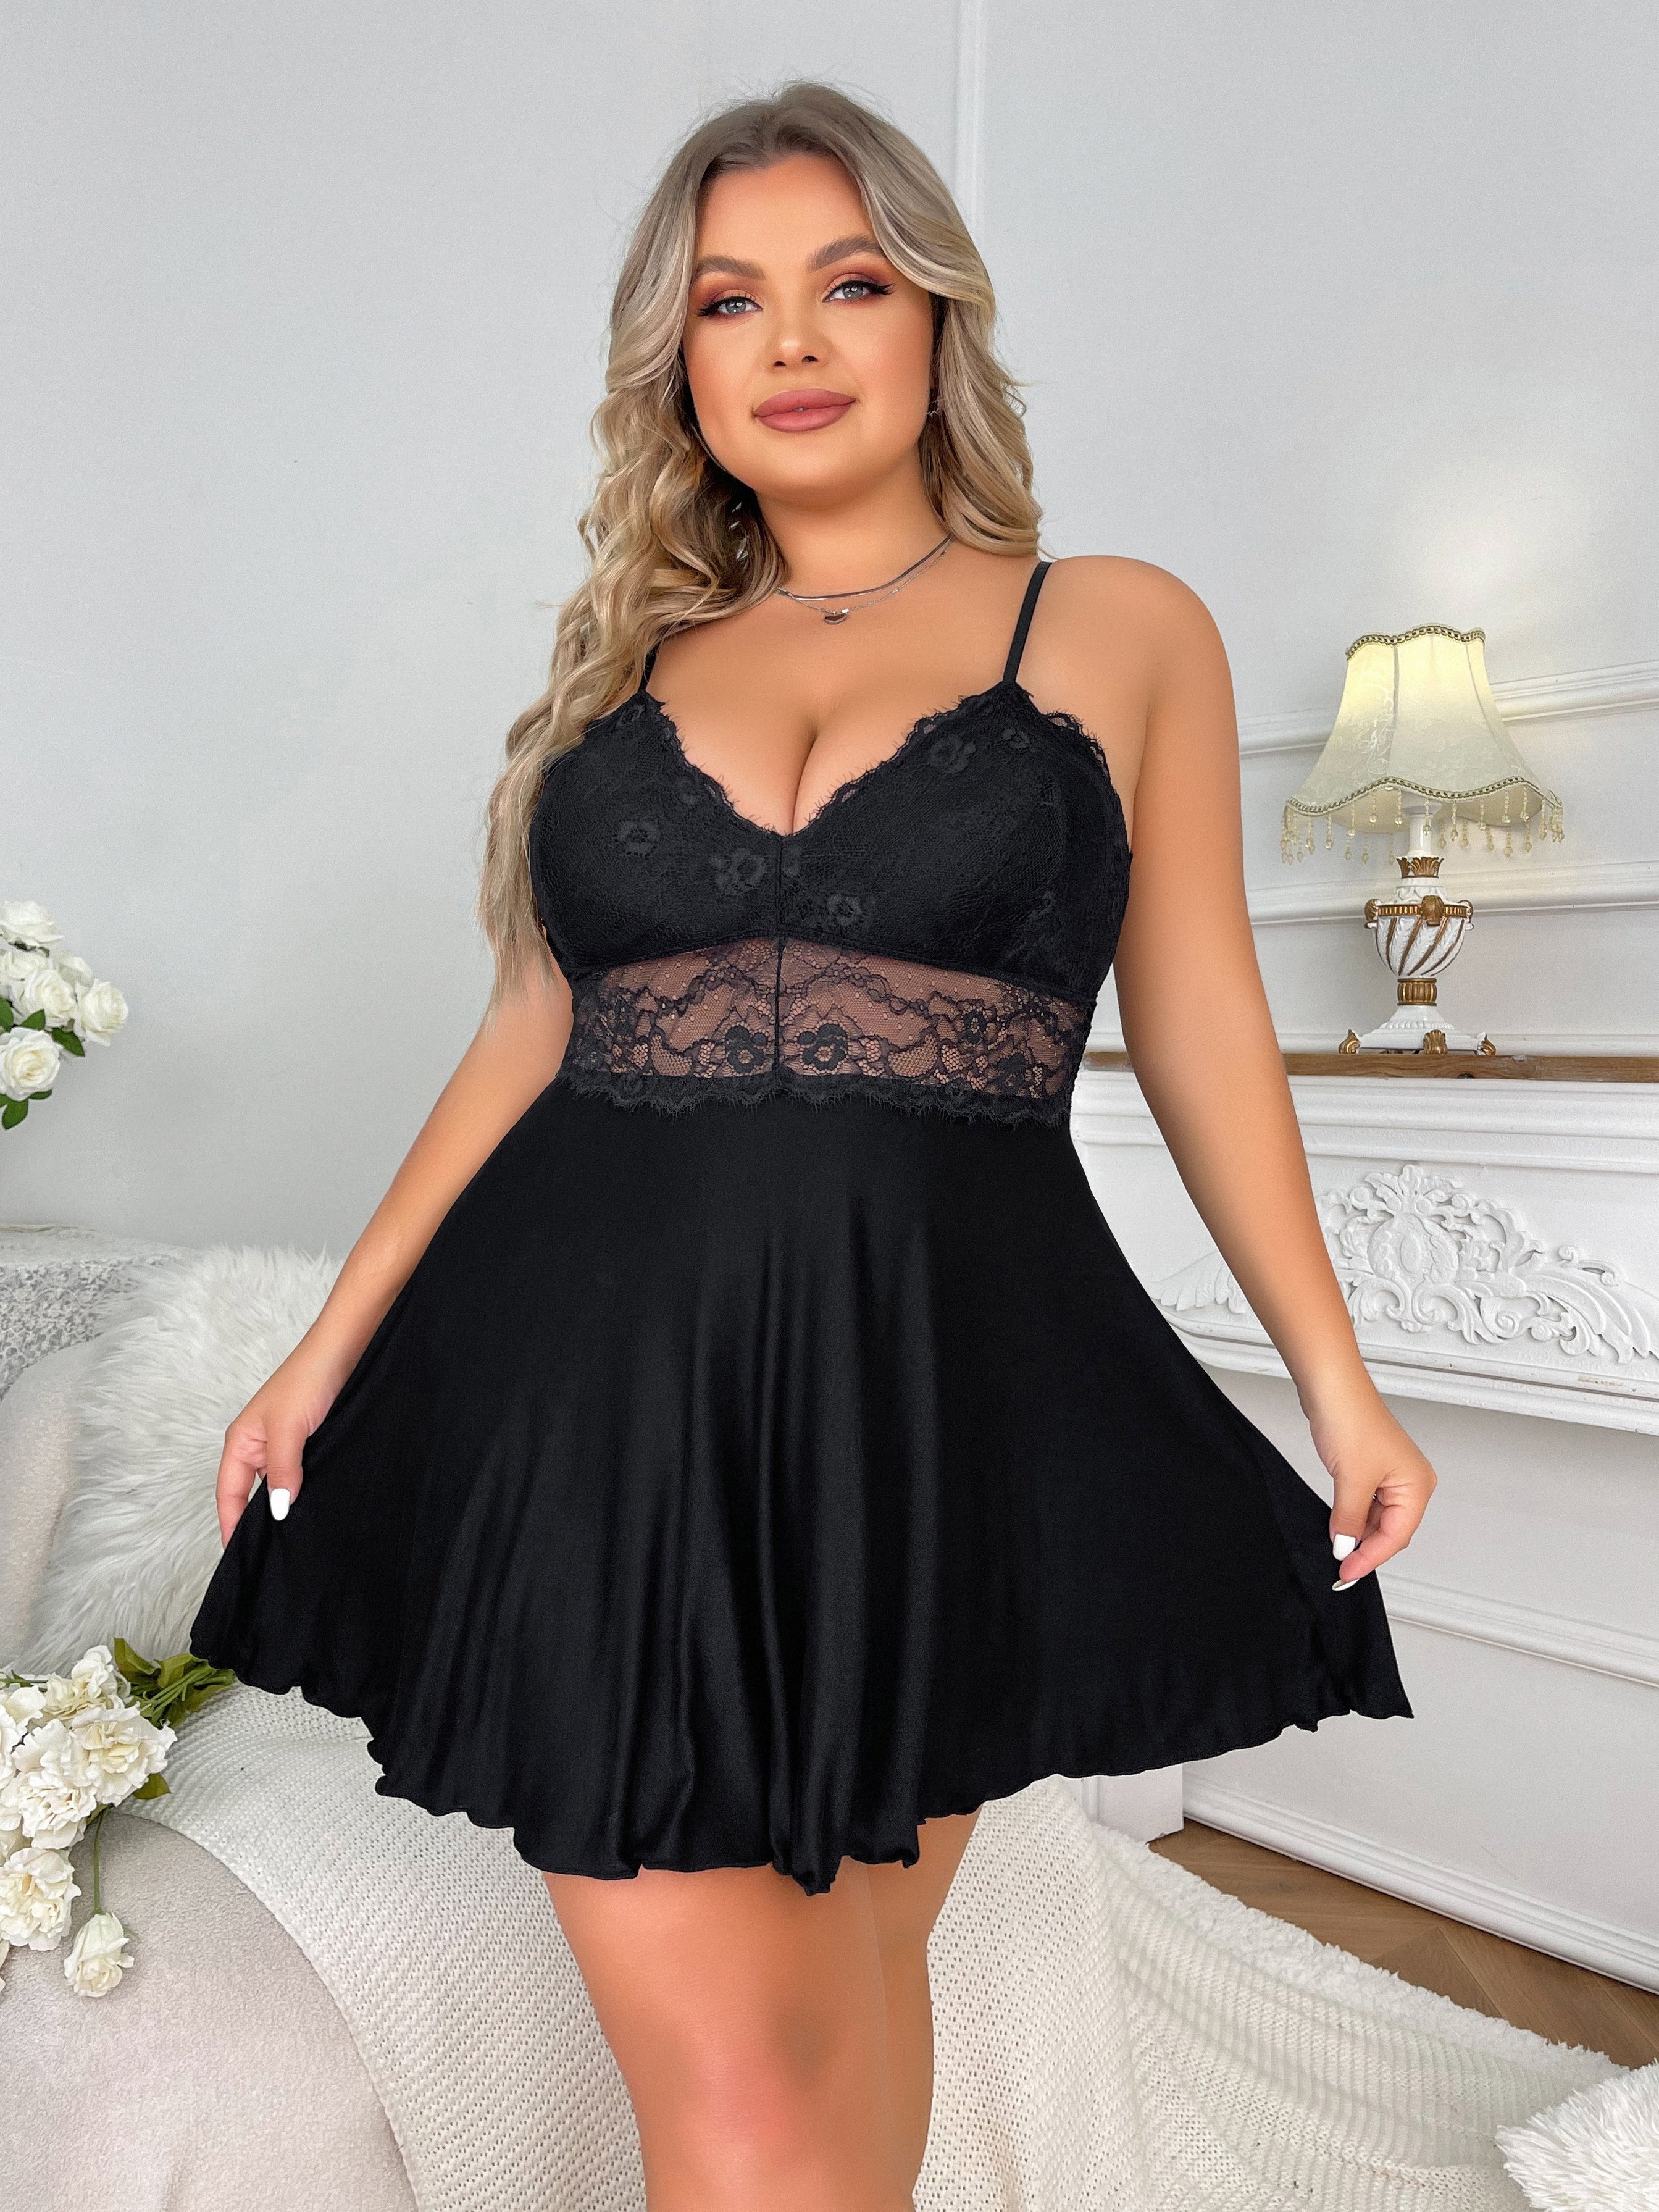 Buy Women Sexy Lingerie Set, Lace Floral Wave V-Neck Babydoll See